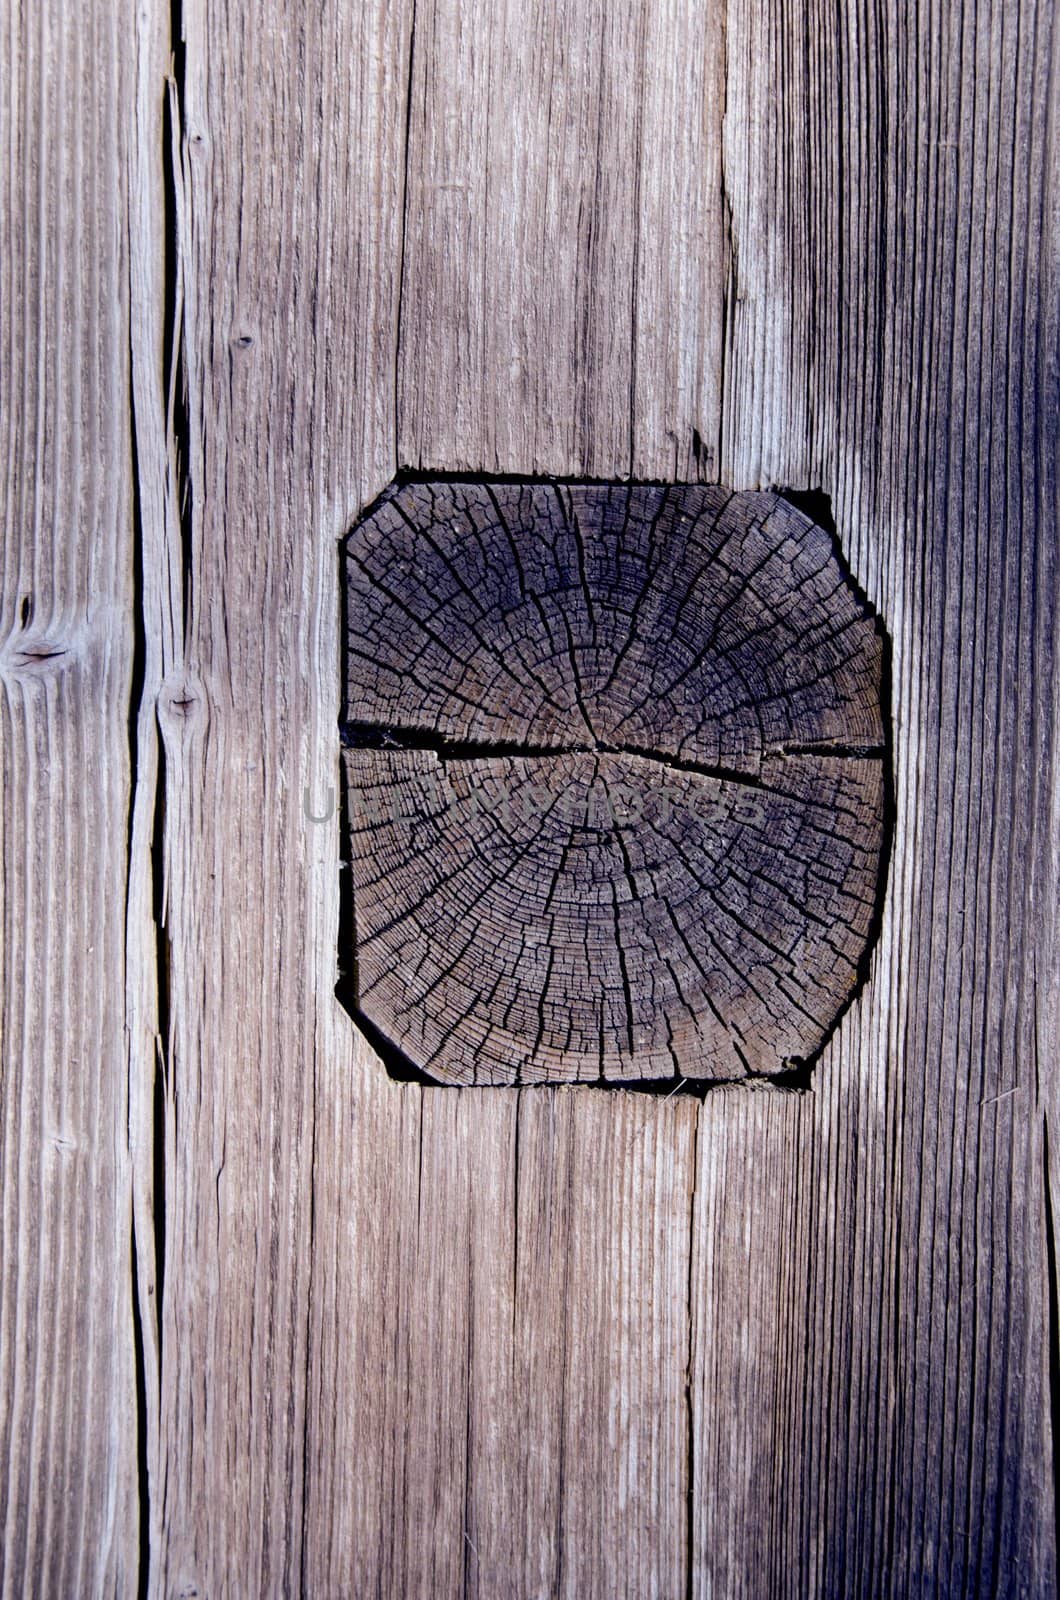 Closeup of ancient wooden house wall fragment. Architecture made of logs and planks.